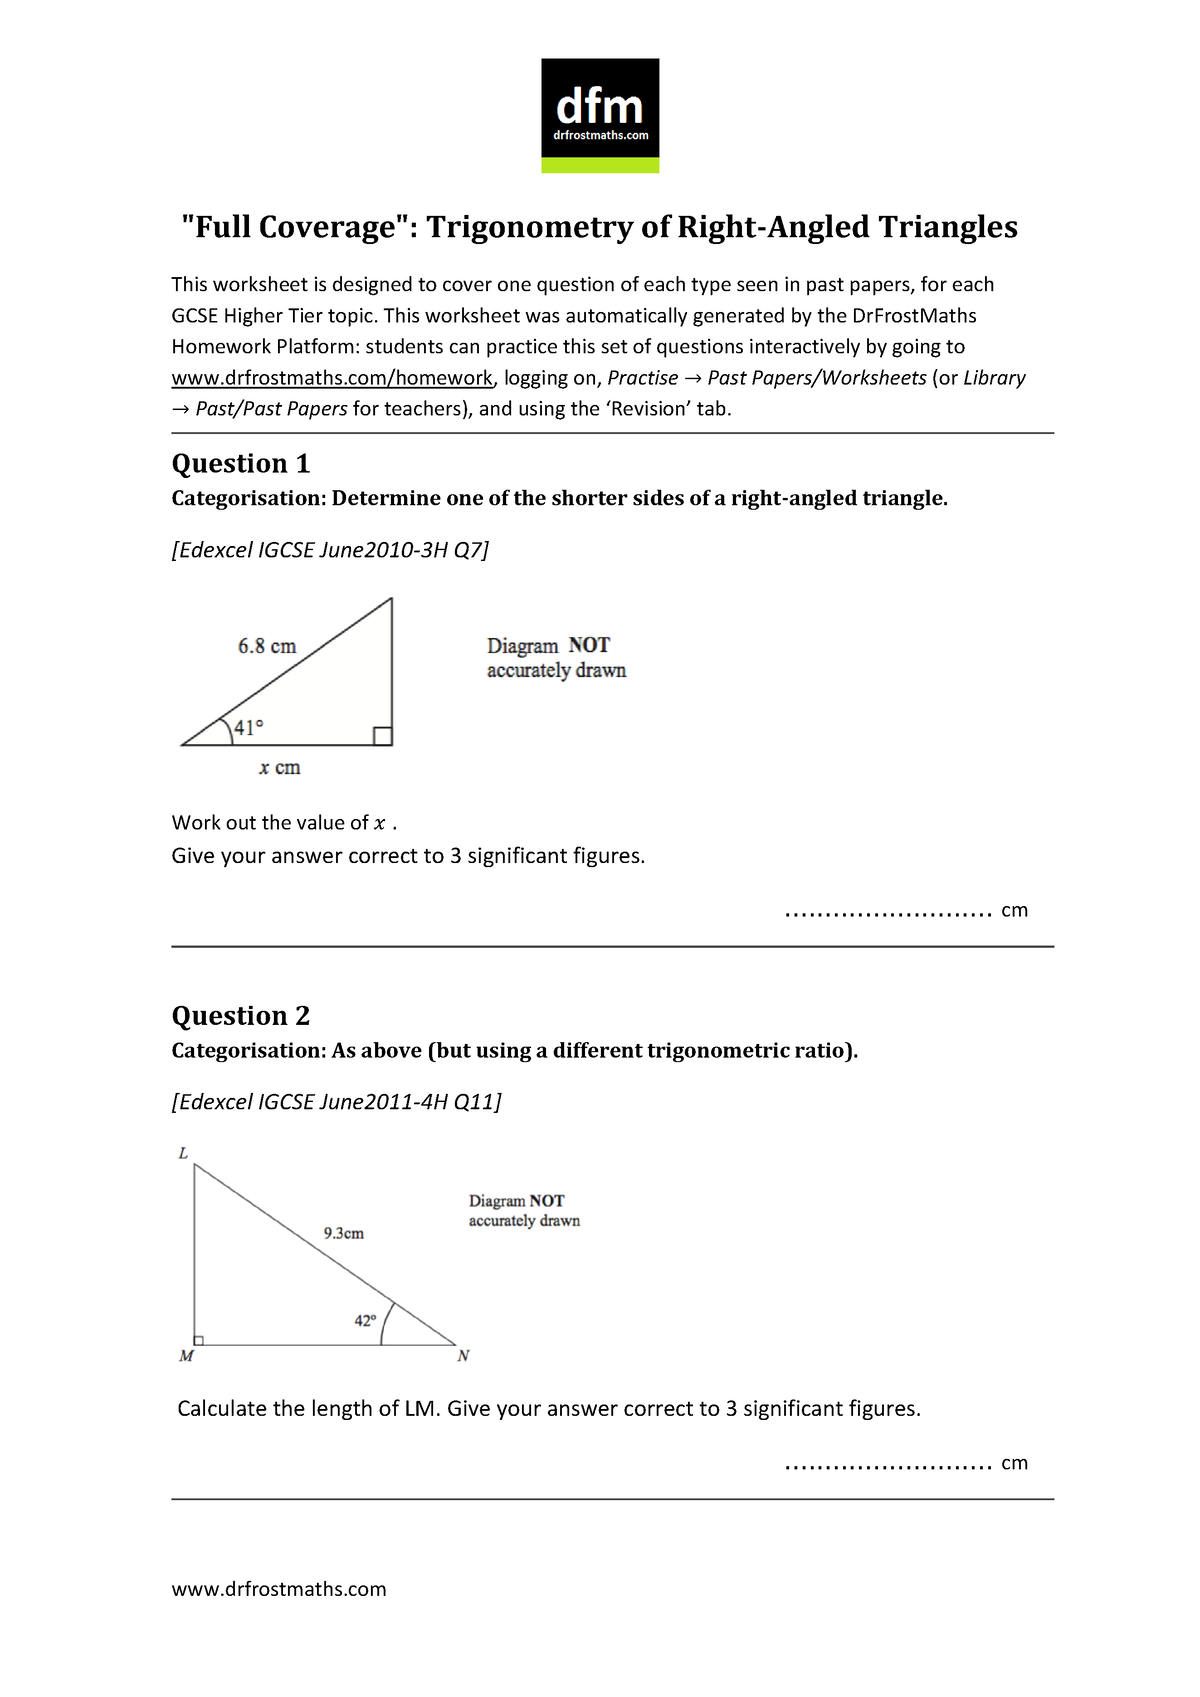 DFMFull Coverage-Trig Right Angled maths - quot;Full Coveragequot;:  Trigonometry of Right-Angled - StuDocu